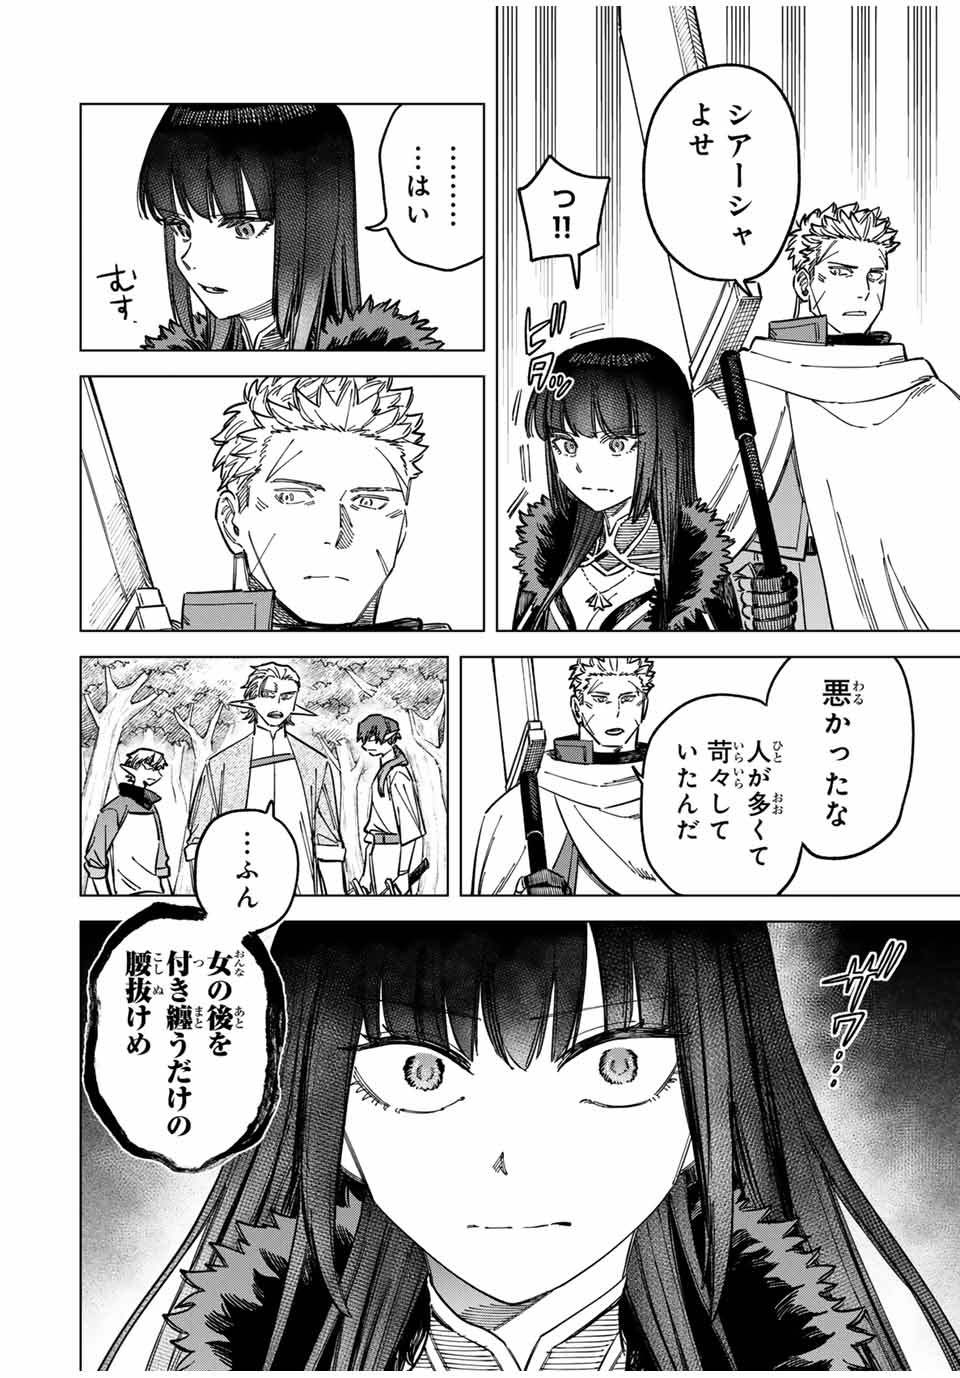 Witch and Mercenary 魔女と傭兵 第9.1話 - Page 6